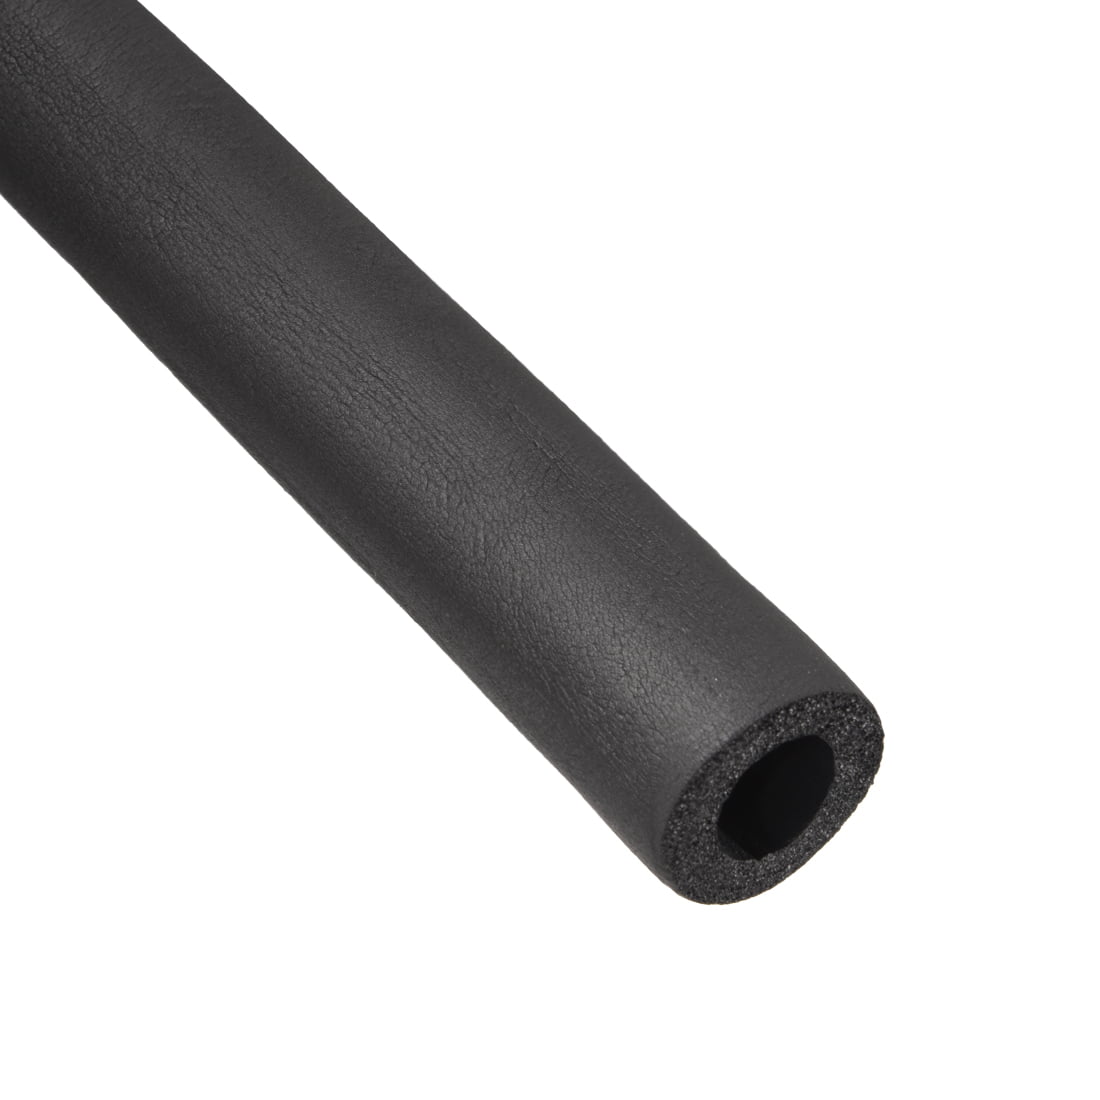 6Ft Long Hose 3/4" x 3/8" Air Conditioner Heat Insulation Pipe Black X9X1 